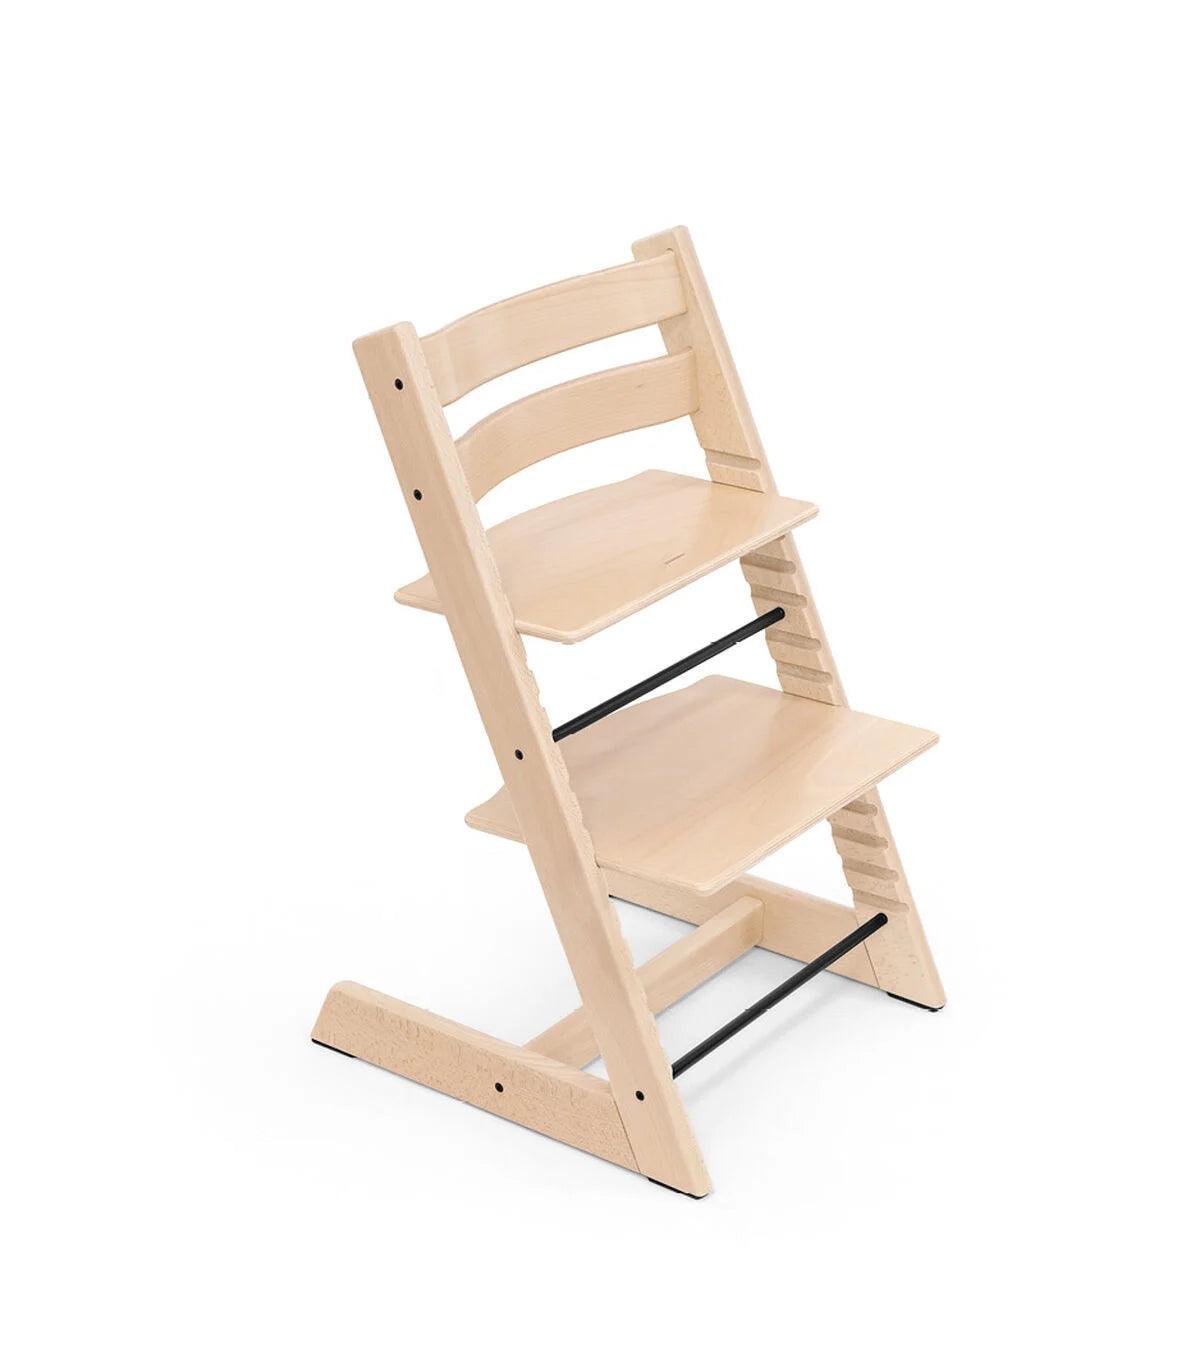 Stokke Tripp Trapp Chair in Natural wood colour, in front of a white backdrop